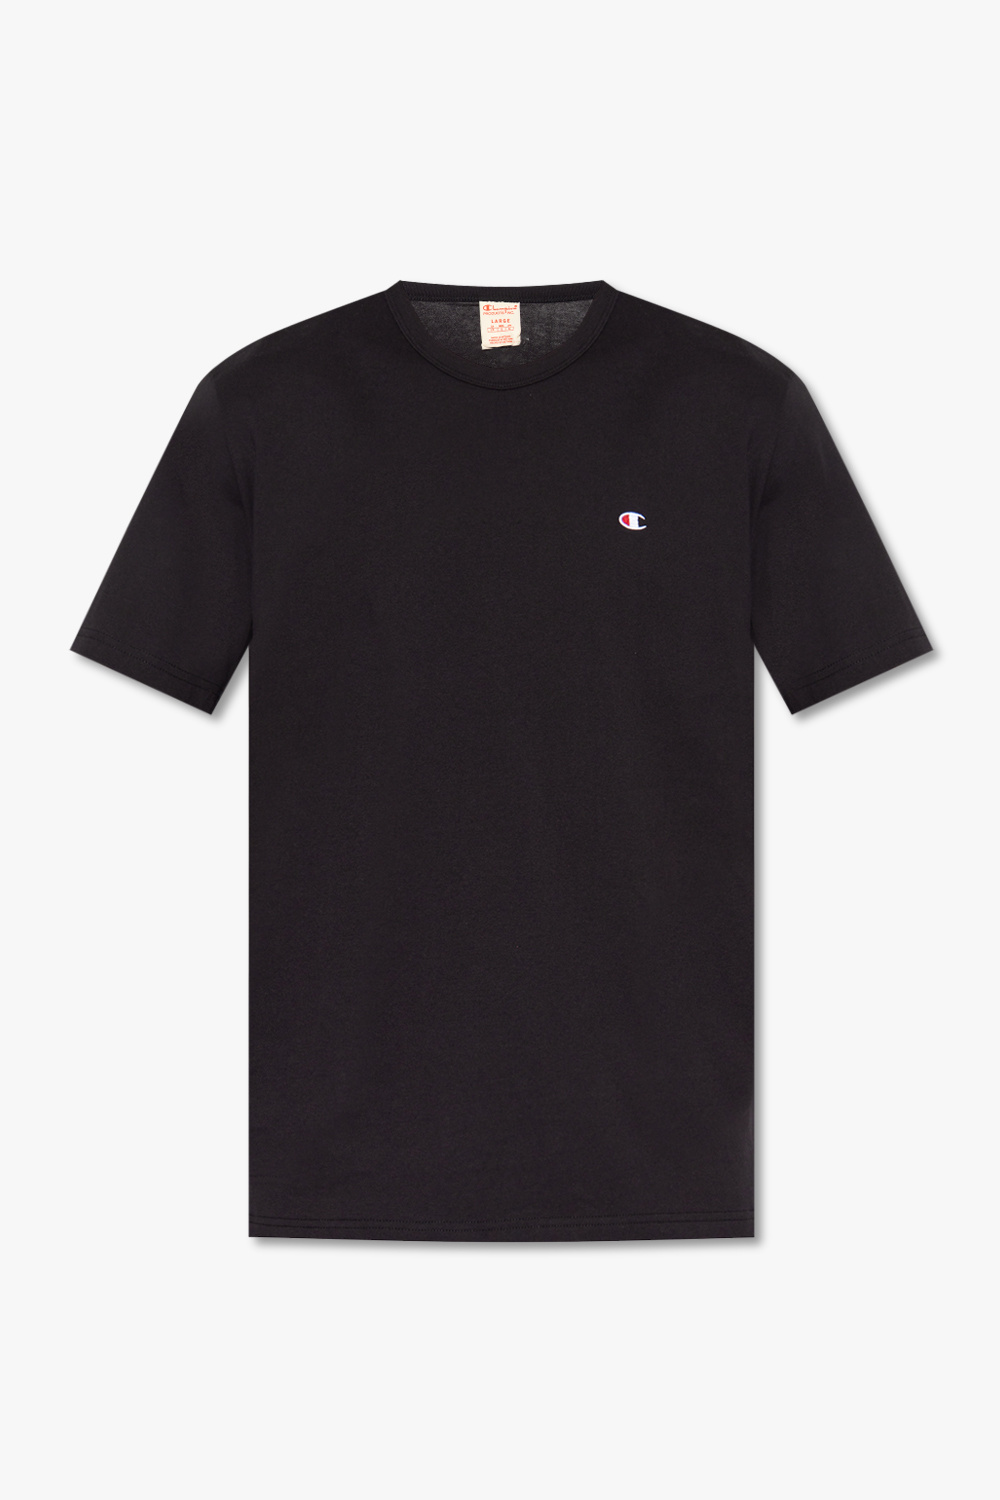 Champion Black T-shirt For Kids With Flowers